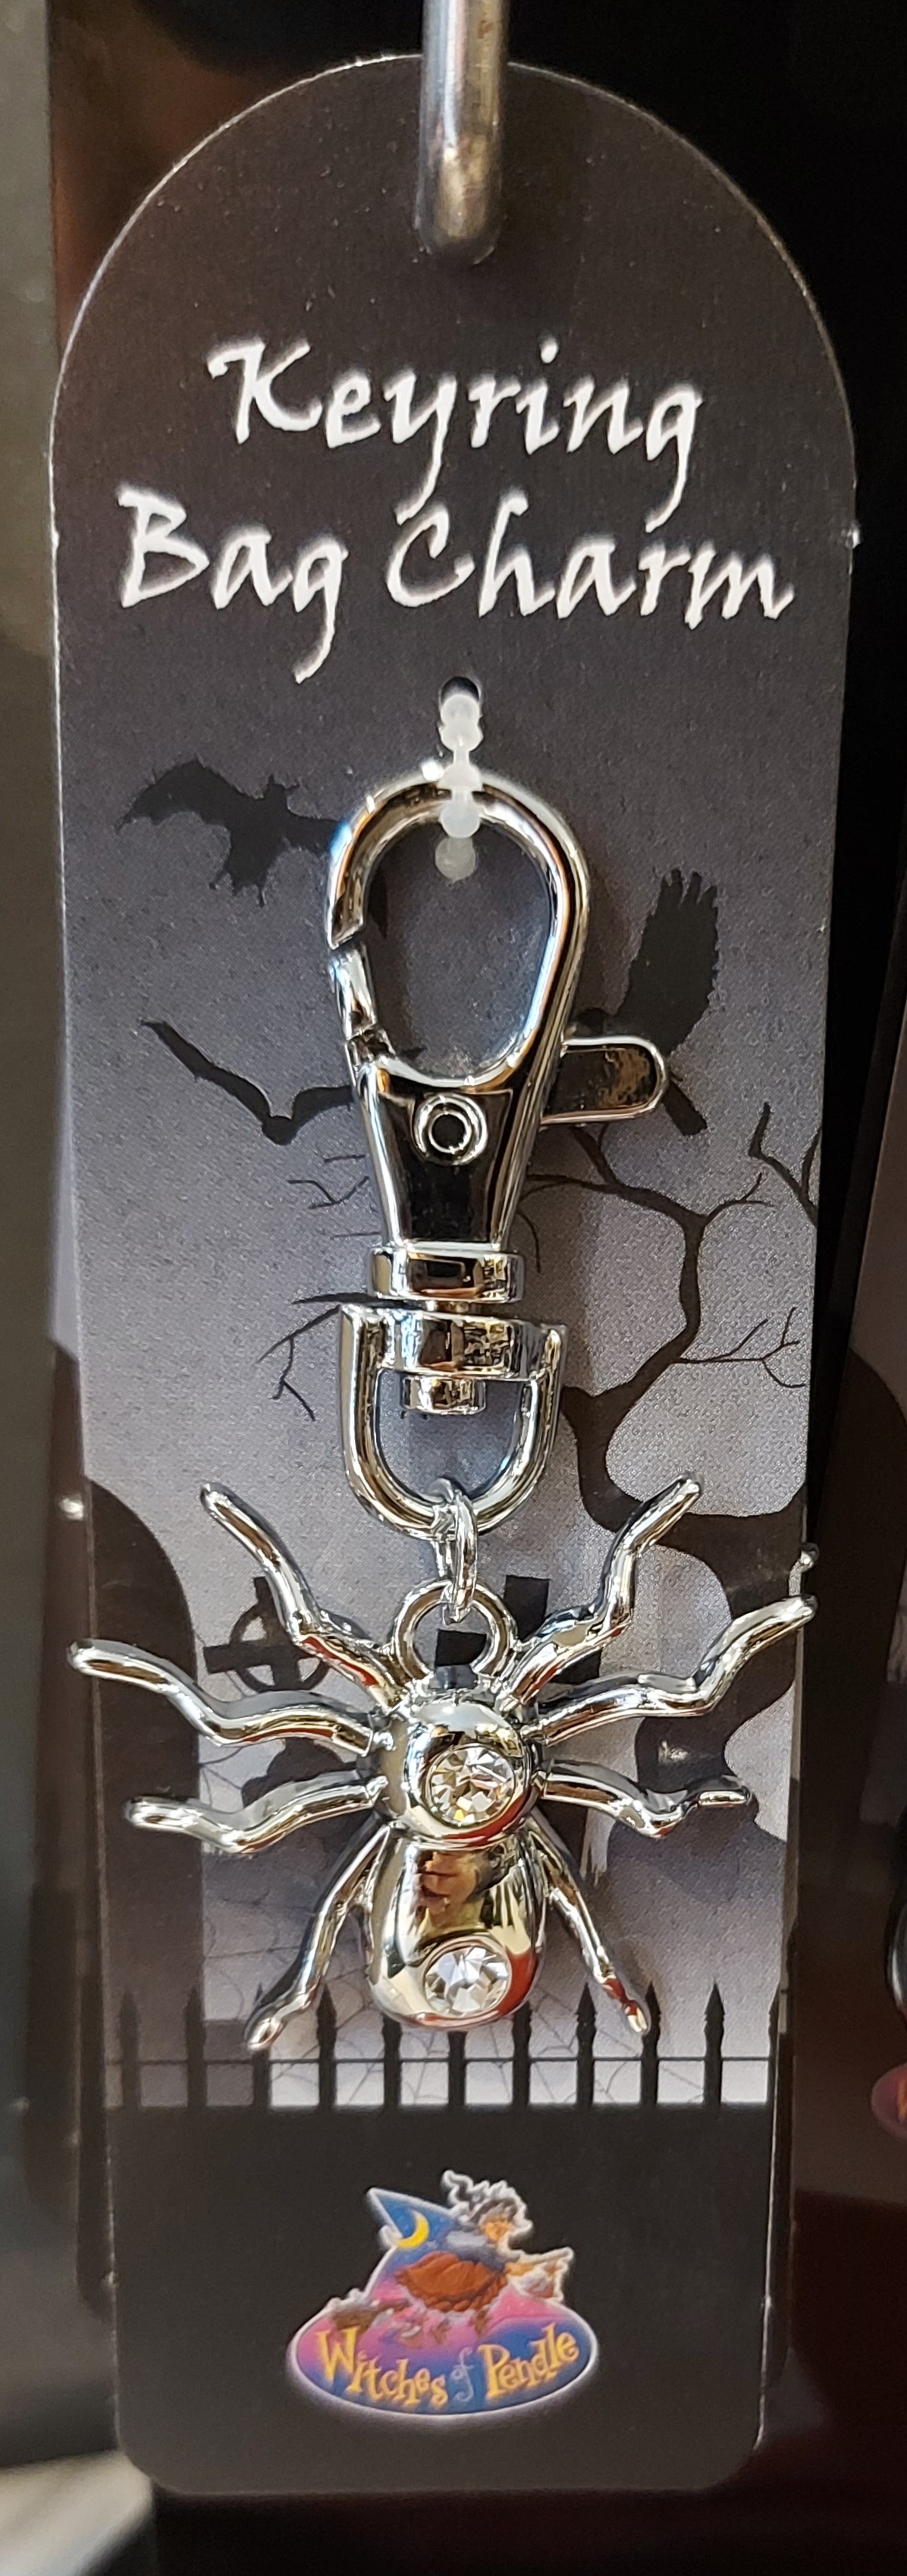 Witches of pendle diamante bag charm/keyring spider